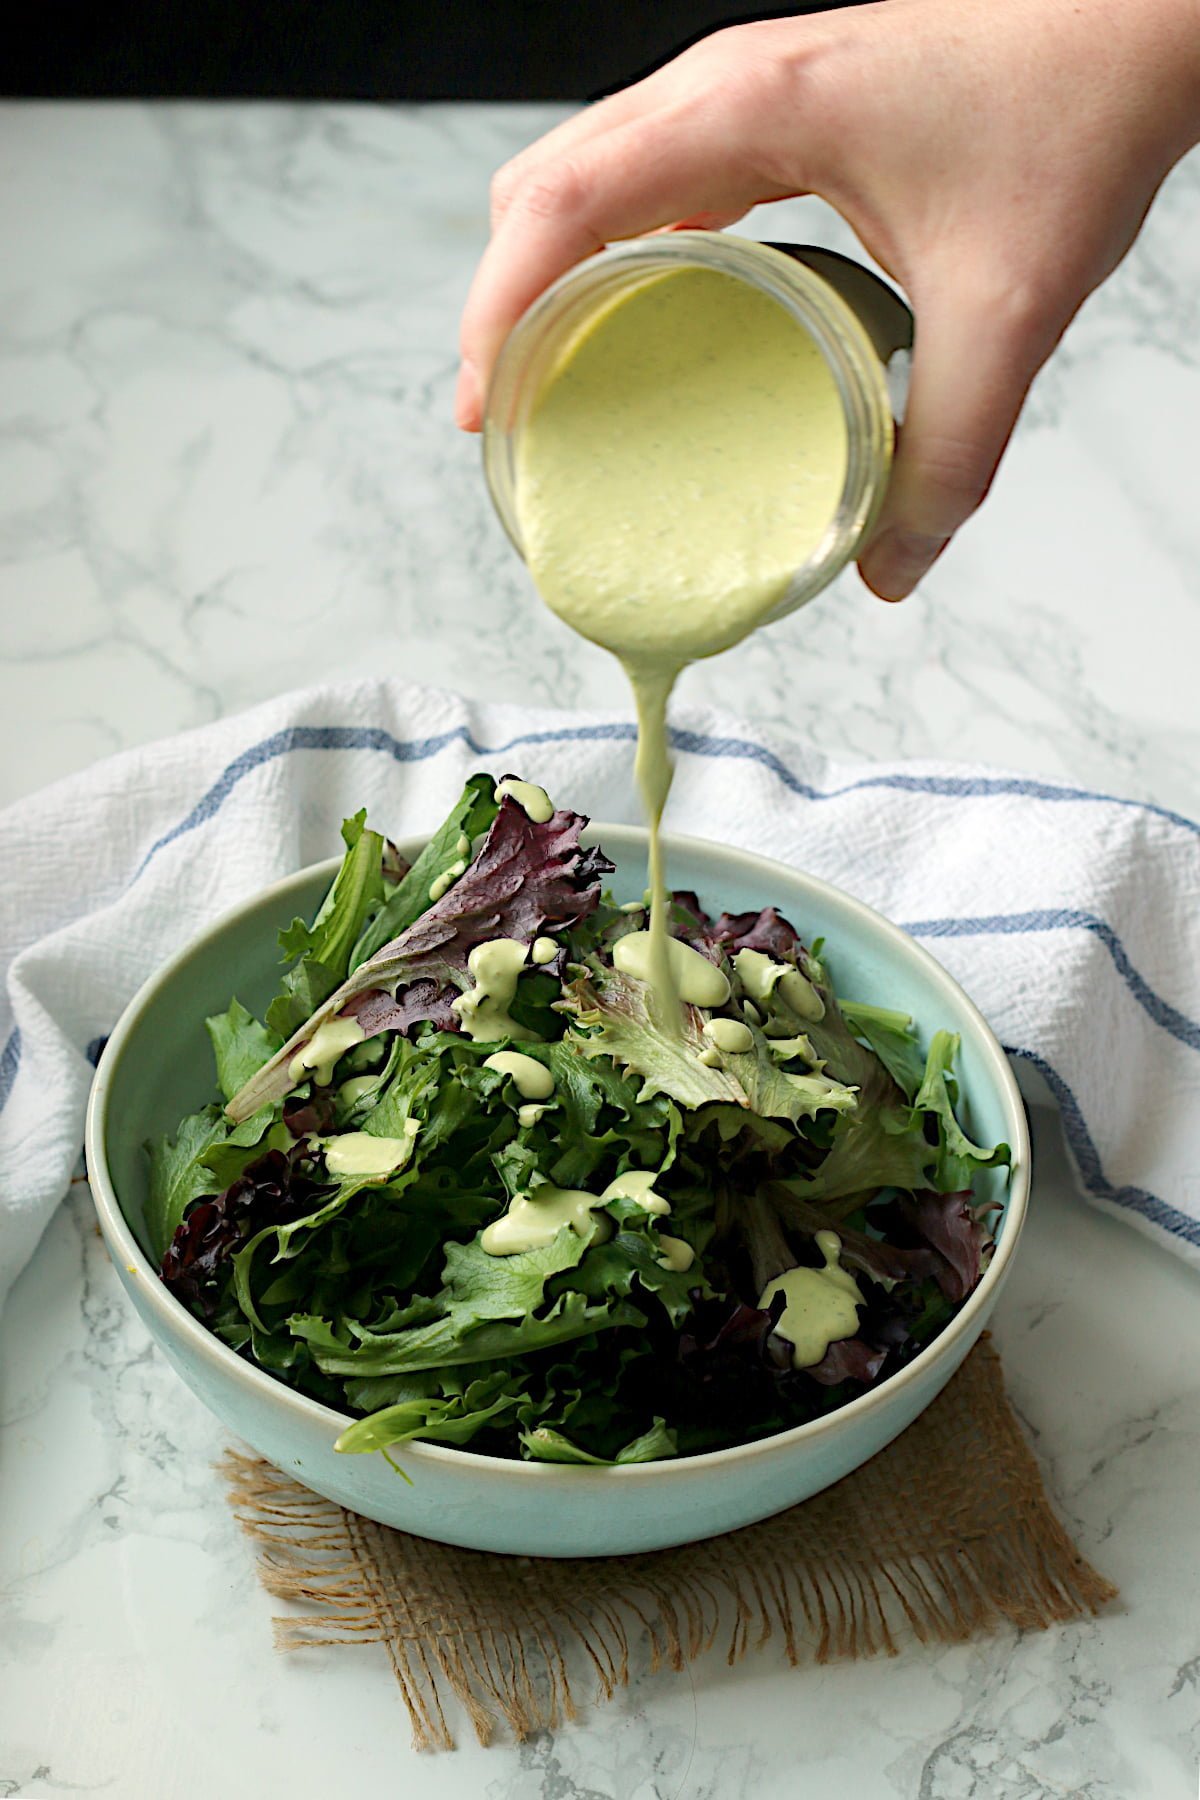 A hand pouring homemade creamy pesto salad dressing on a bowl of mixed salad greens.